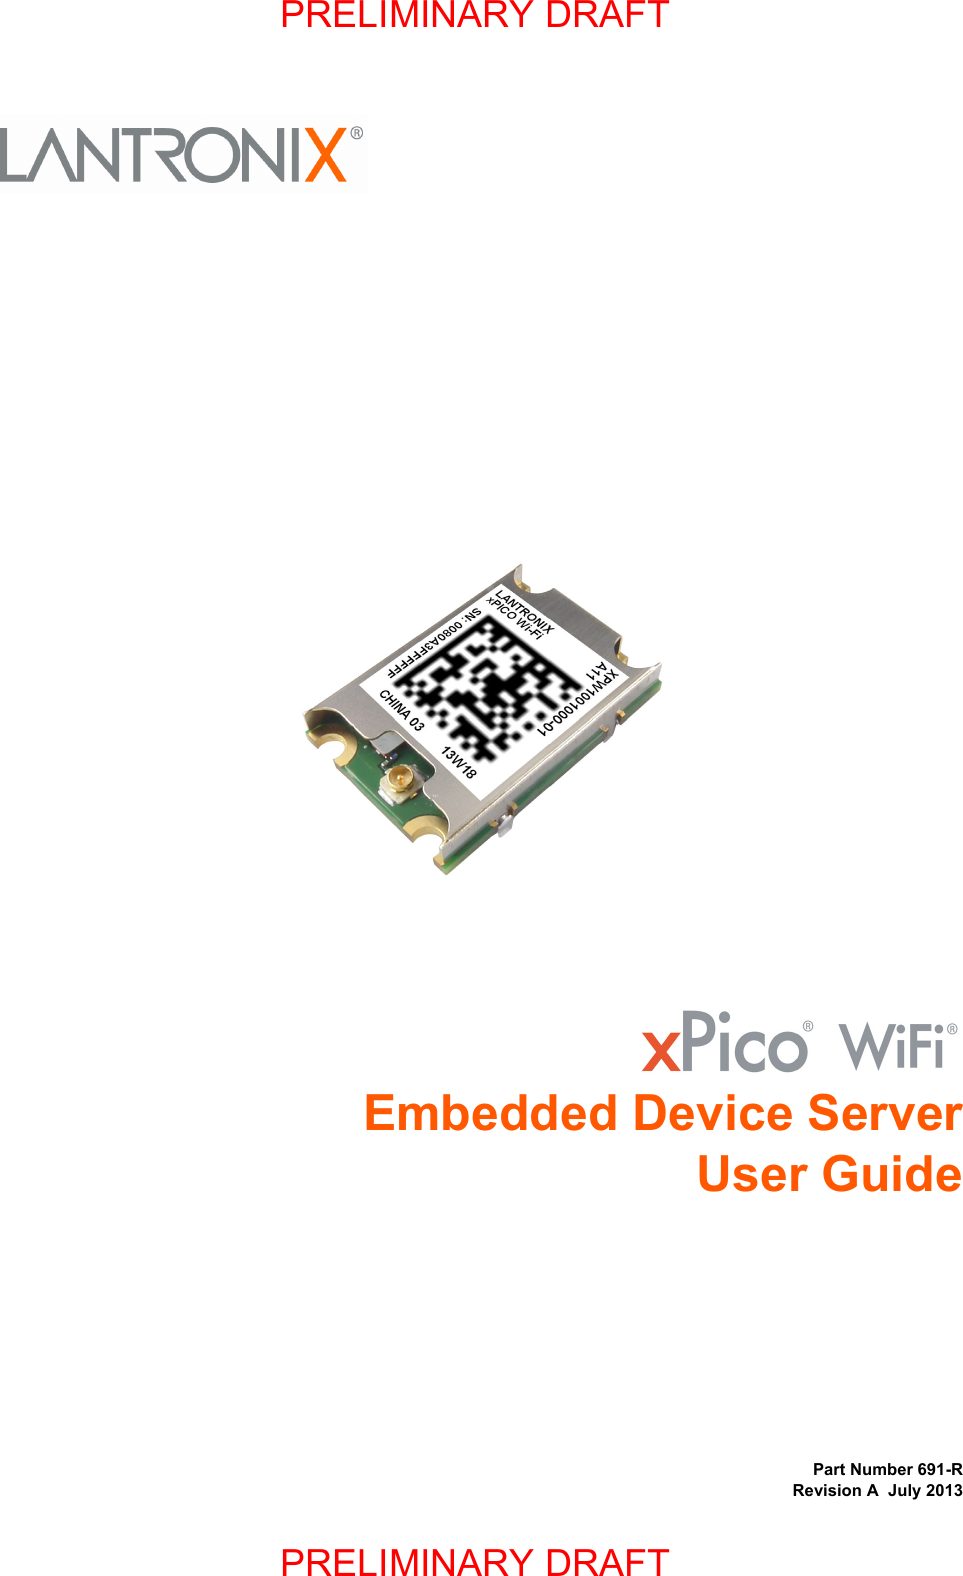 Part Number 691-RRevision A  July 2013xPico Wi-Fi Embedded Device Server User GuidePRELIMINARY DRAFTPRELIMINARY DRAFT